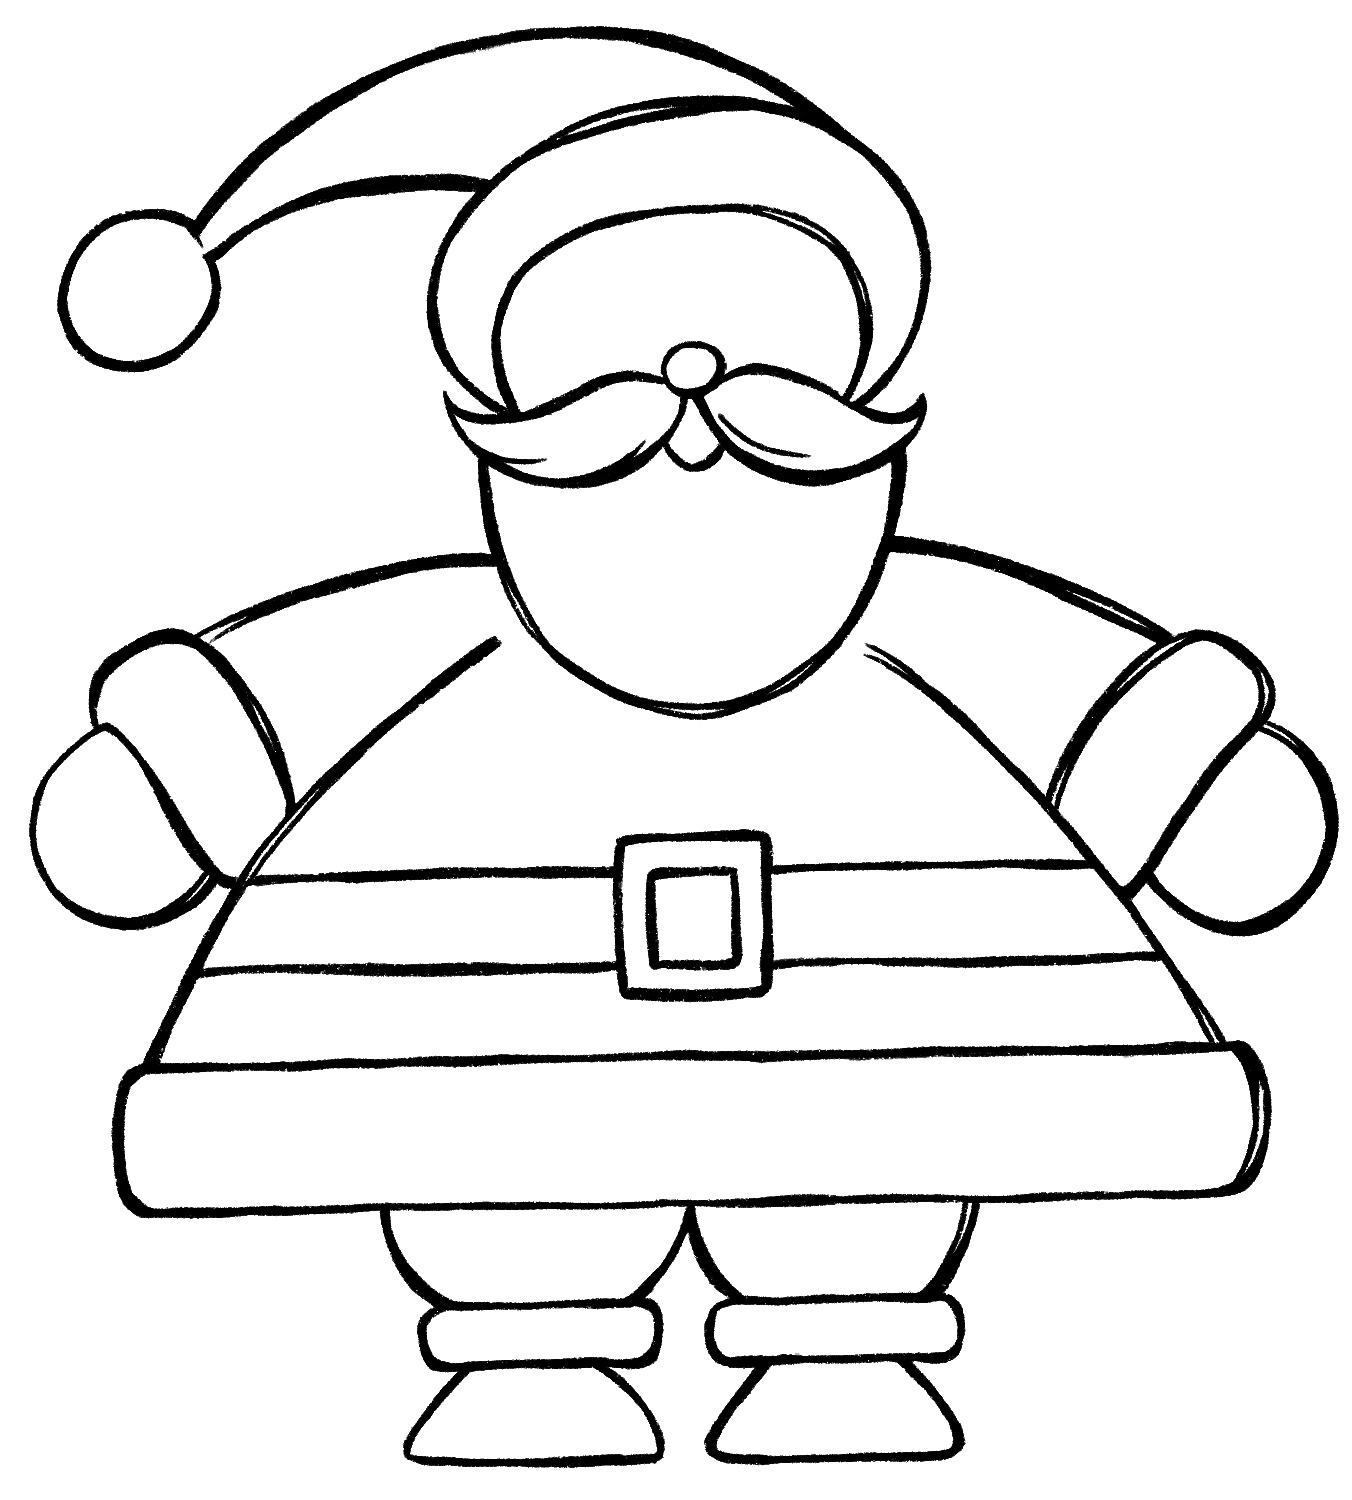 Santa claus easy drawing | how to draw santa claus easy drawing for  beginners | christmas drawing - YouTube